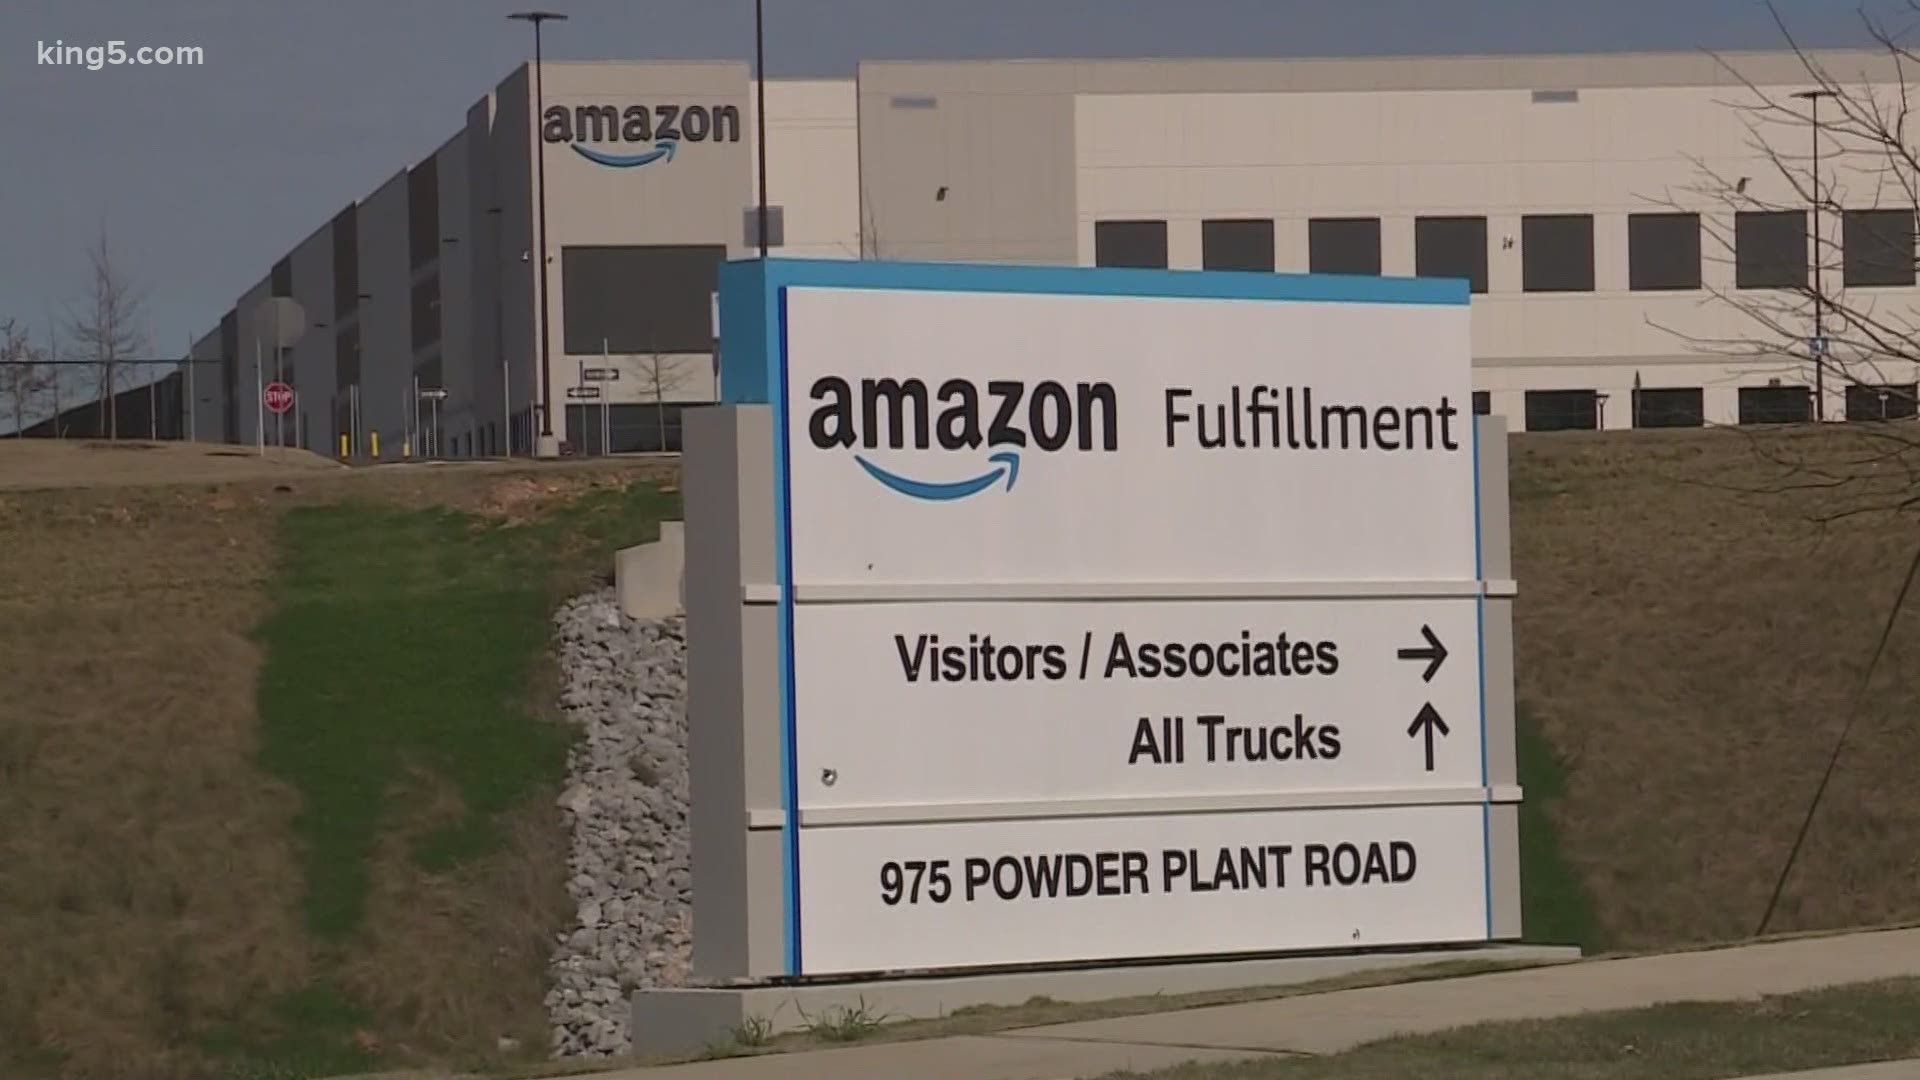 Amazon distribution center workers in Alabama started turning in mail-in ballots on Monday to decide whether to unionize.